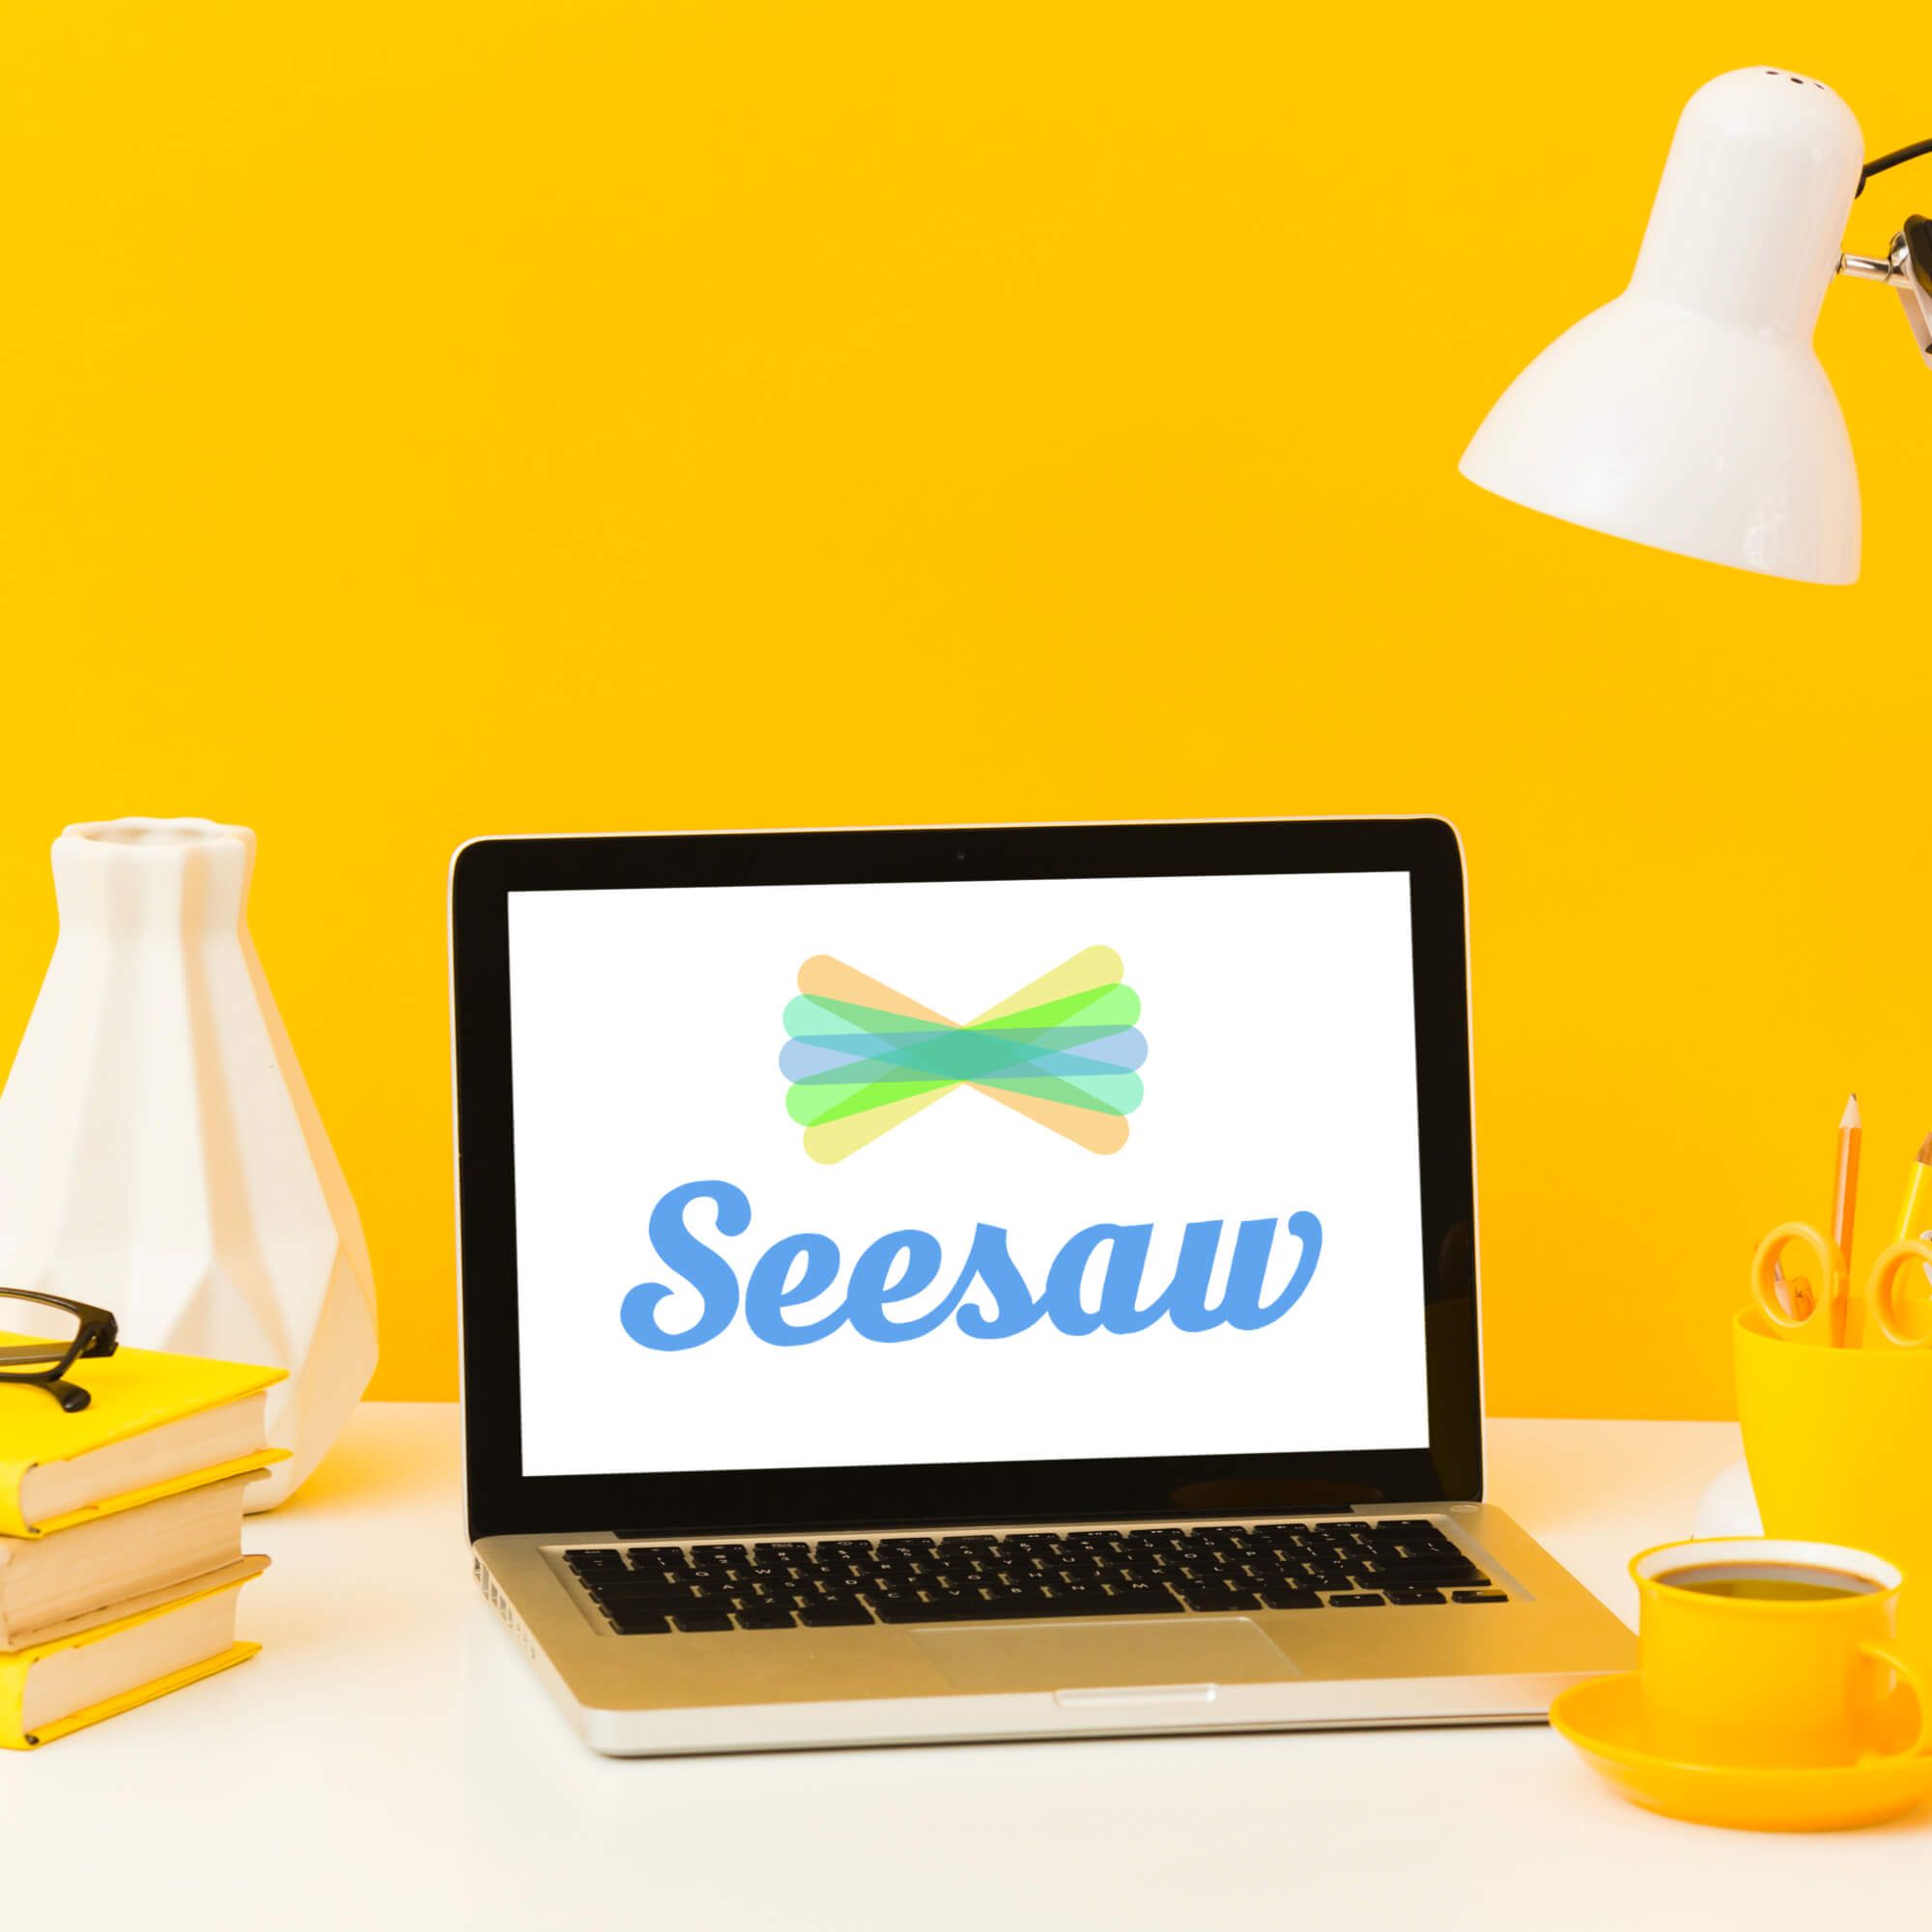 Getting started with Seesaw for teachers (Seesaw tutorial)